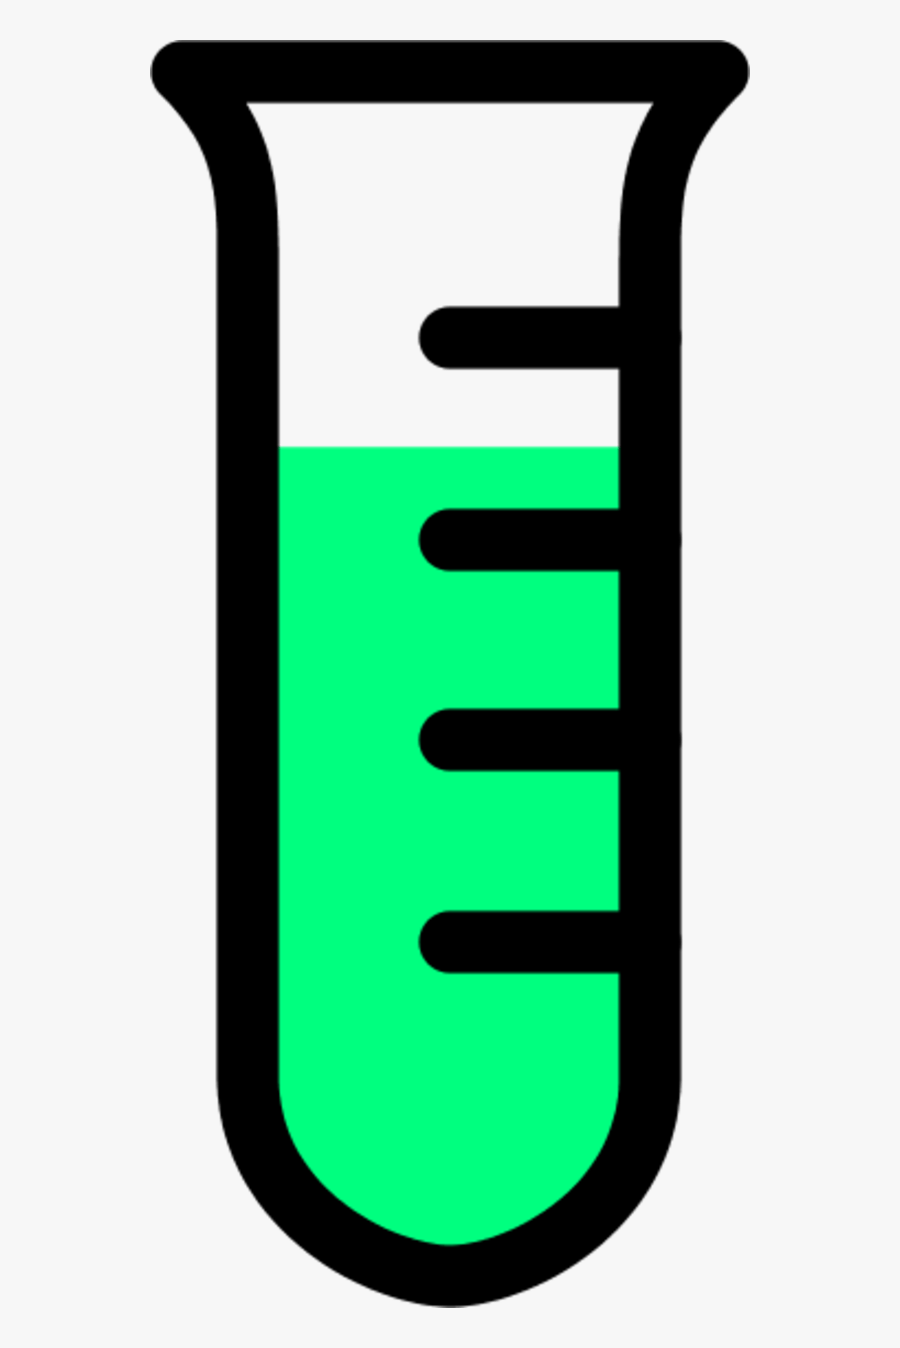 Free Chemistry Clip Art By Phillip Martin Environmental - Test Tube Clipart Png, Transparent Clipart